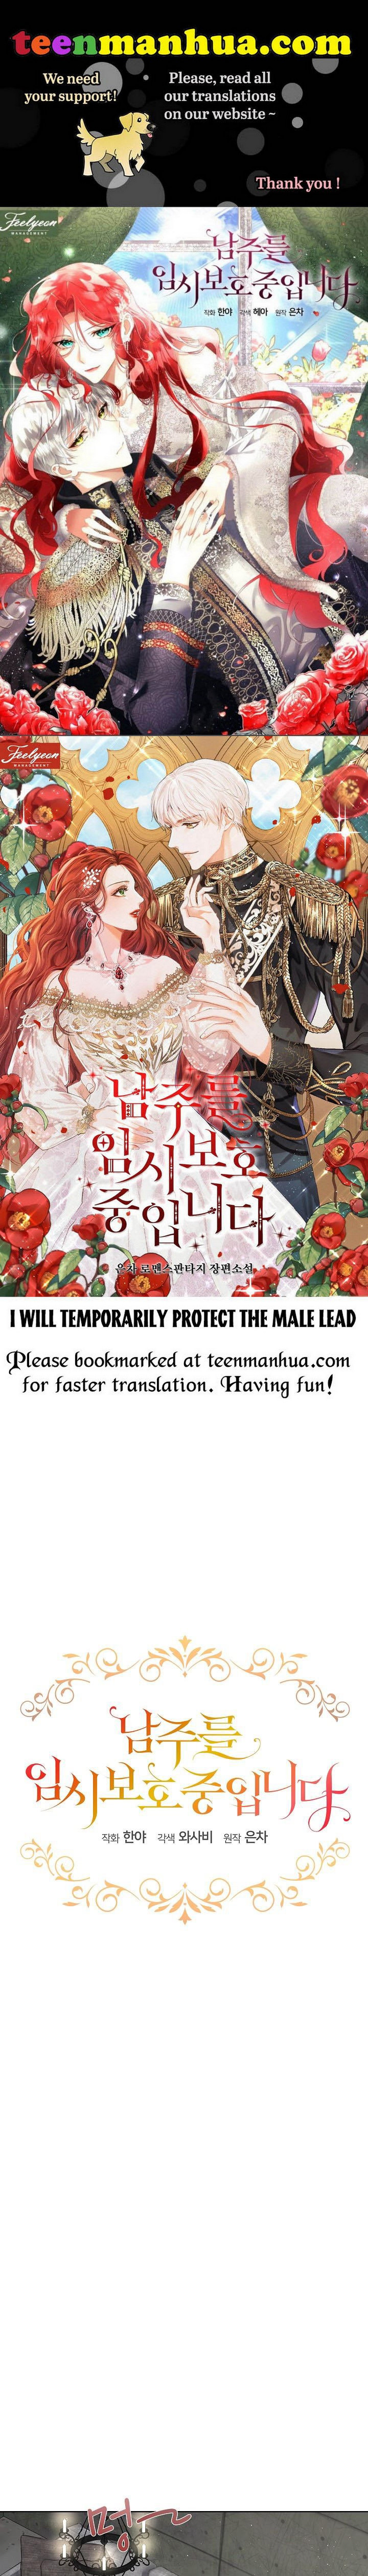 I will temporarily protect the male lead Chapter 1